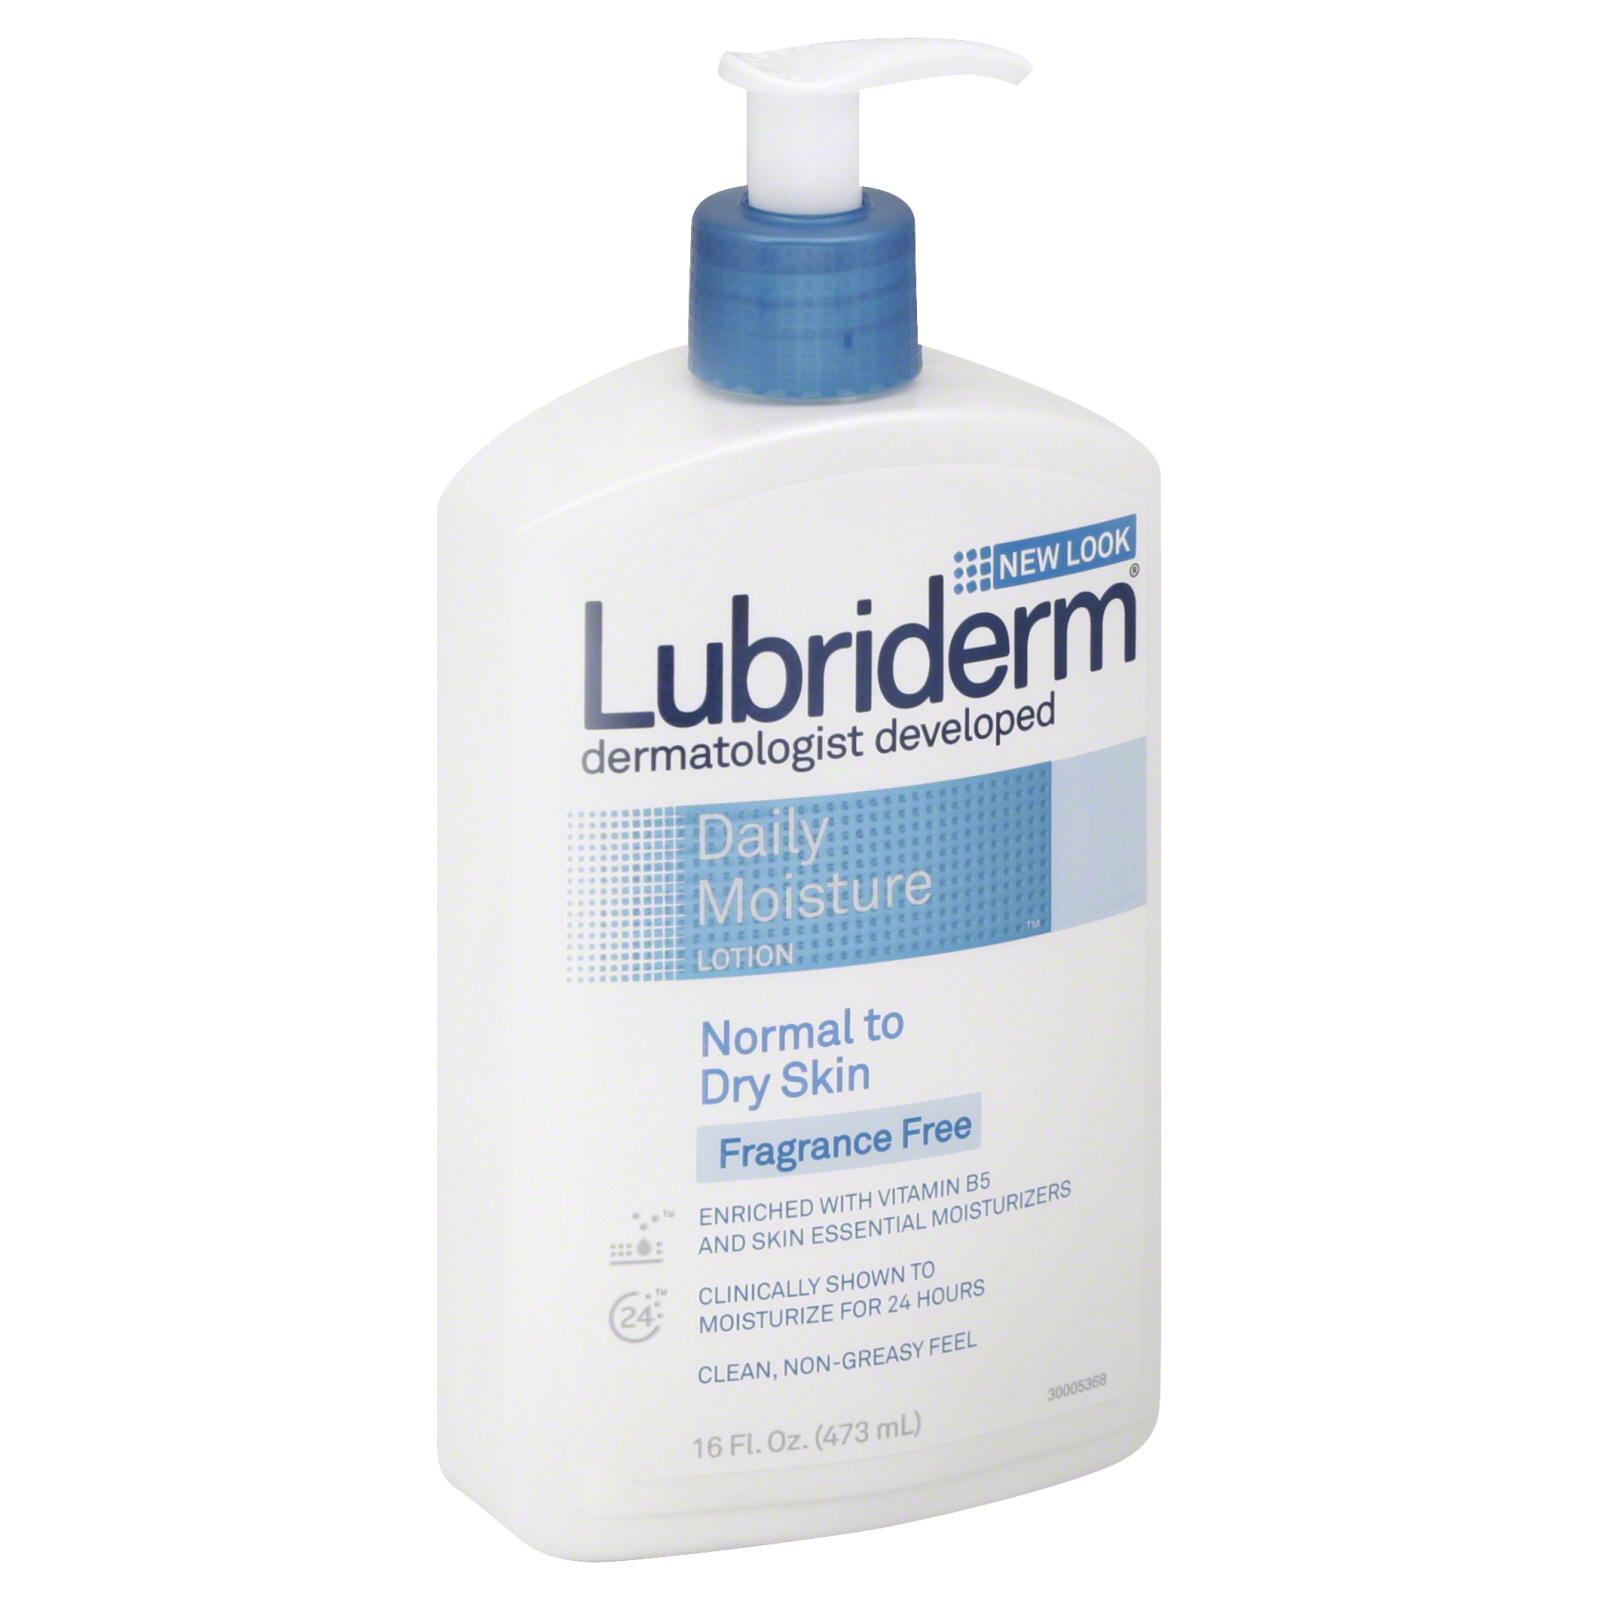 Lubriderm Lotion, Daily Moisture, Normal to Dry Skin, Fragrance Free, 16 fl oz (473 ml)